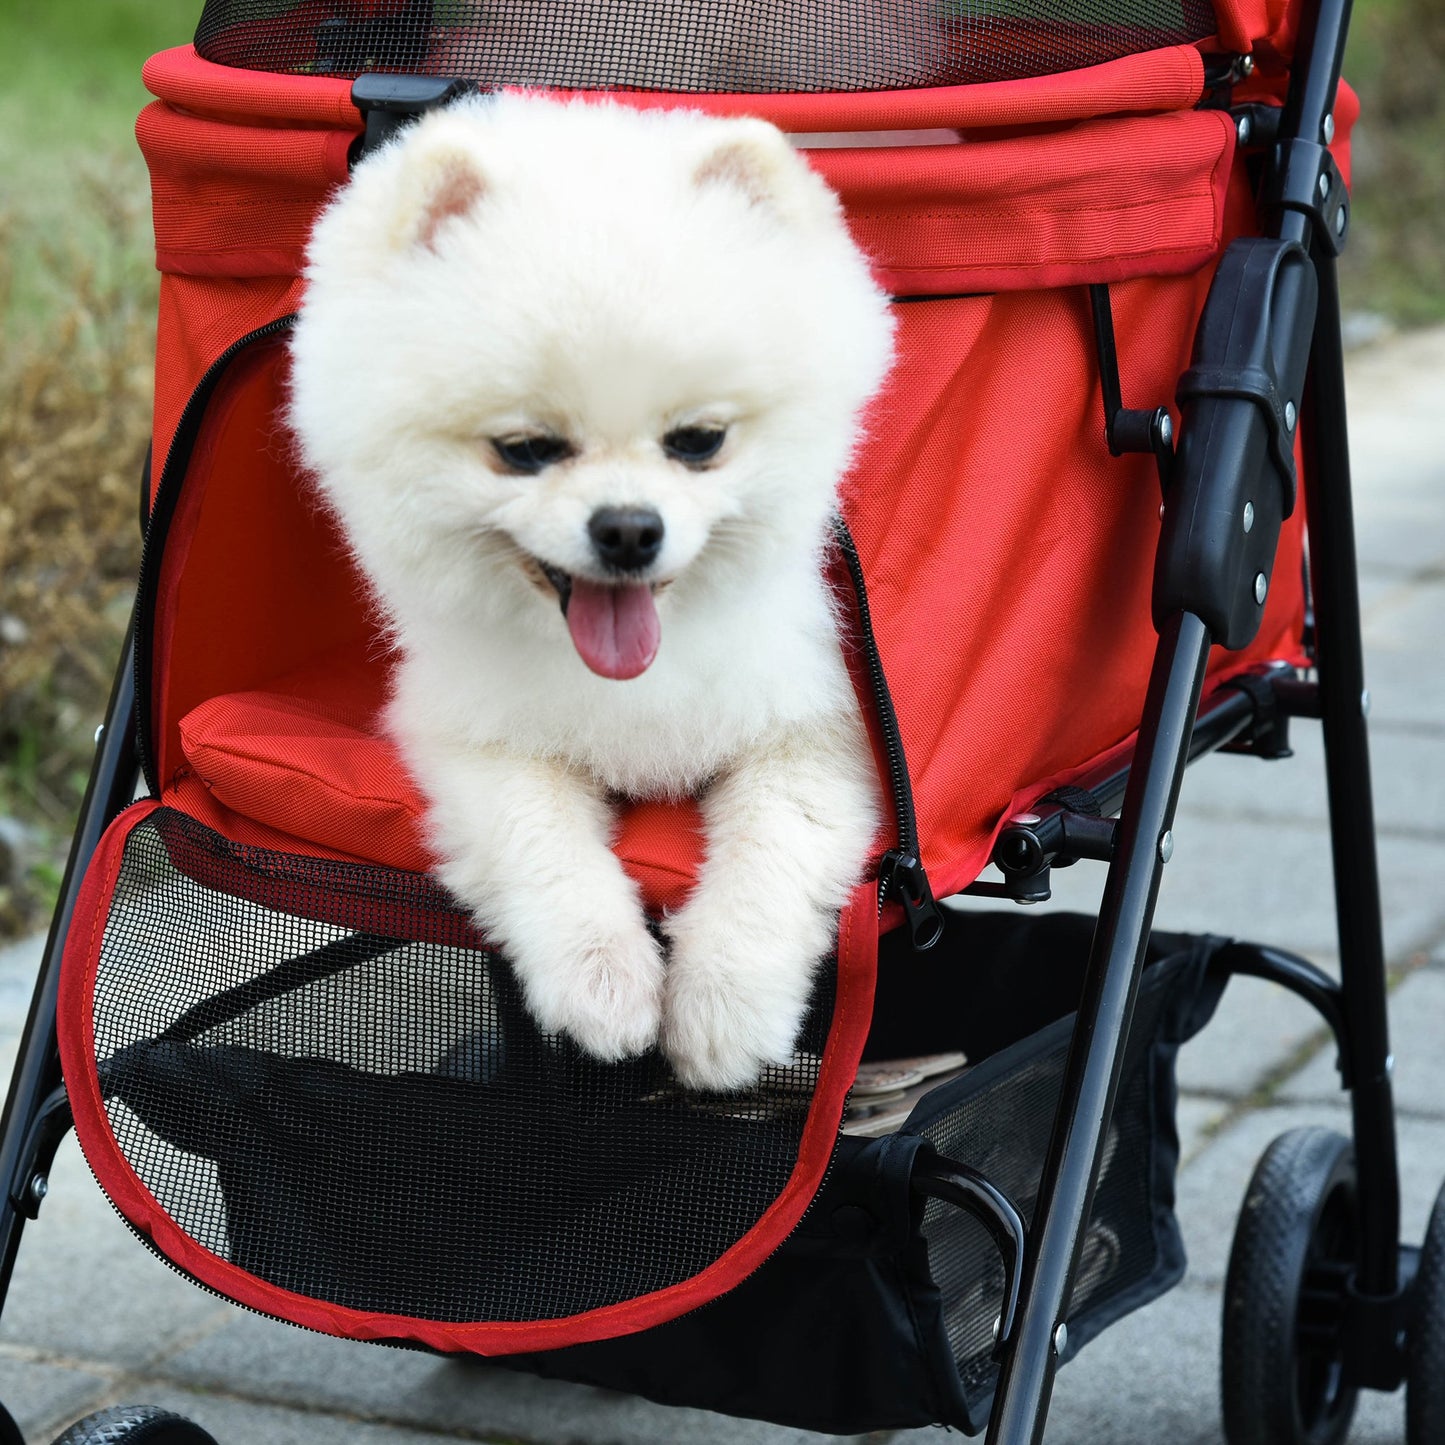 PawHut Pet Stroller No-Zip Foldable Travel Carriage with Brake Basket Adjustable Canopy